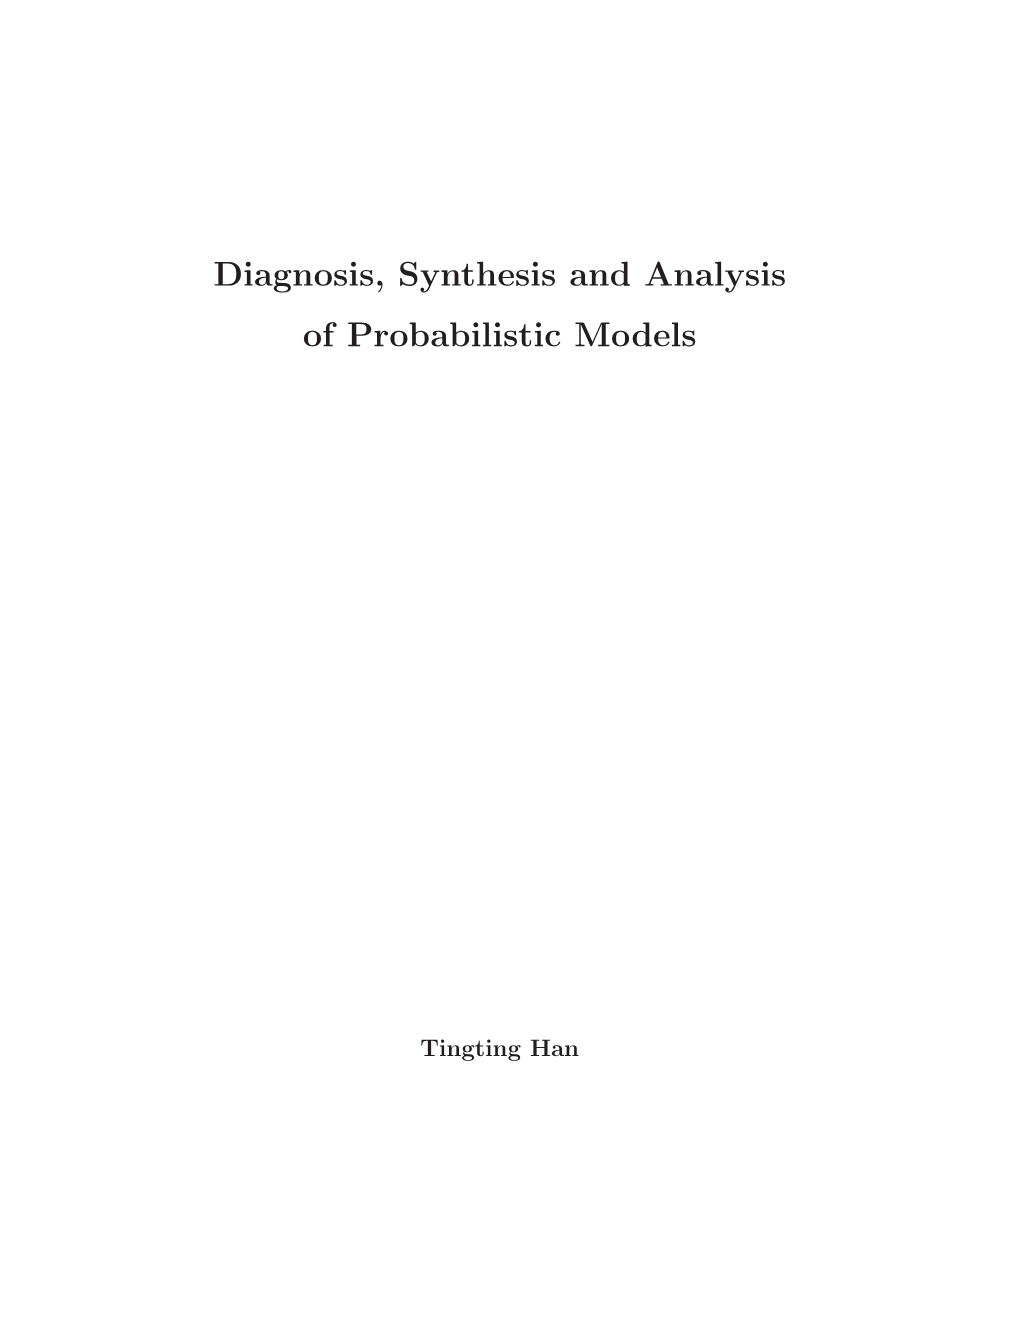 Thesis and Analysis of Probabilistic Models